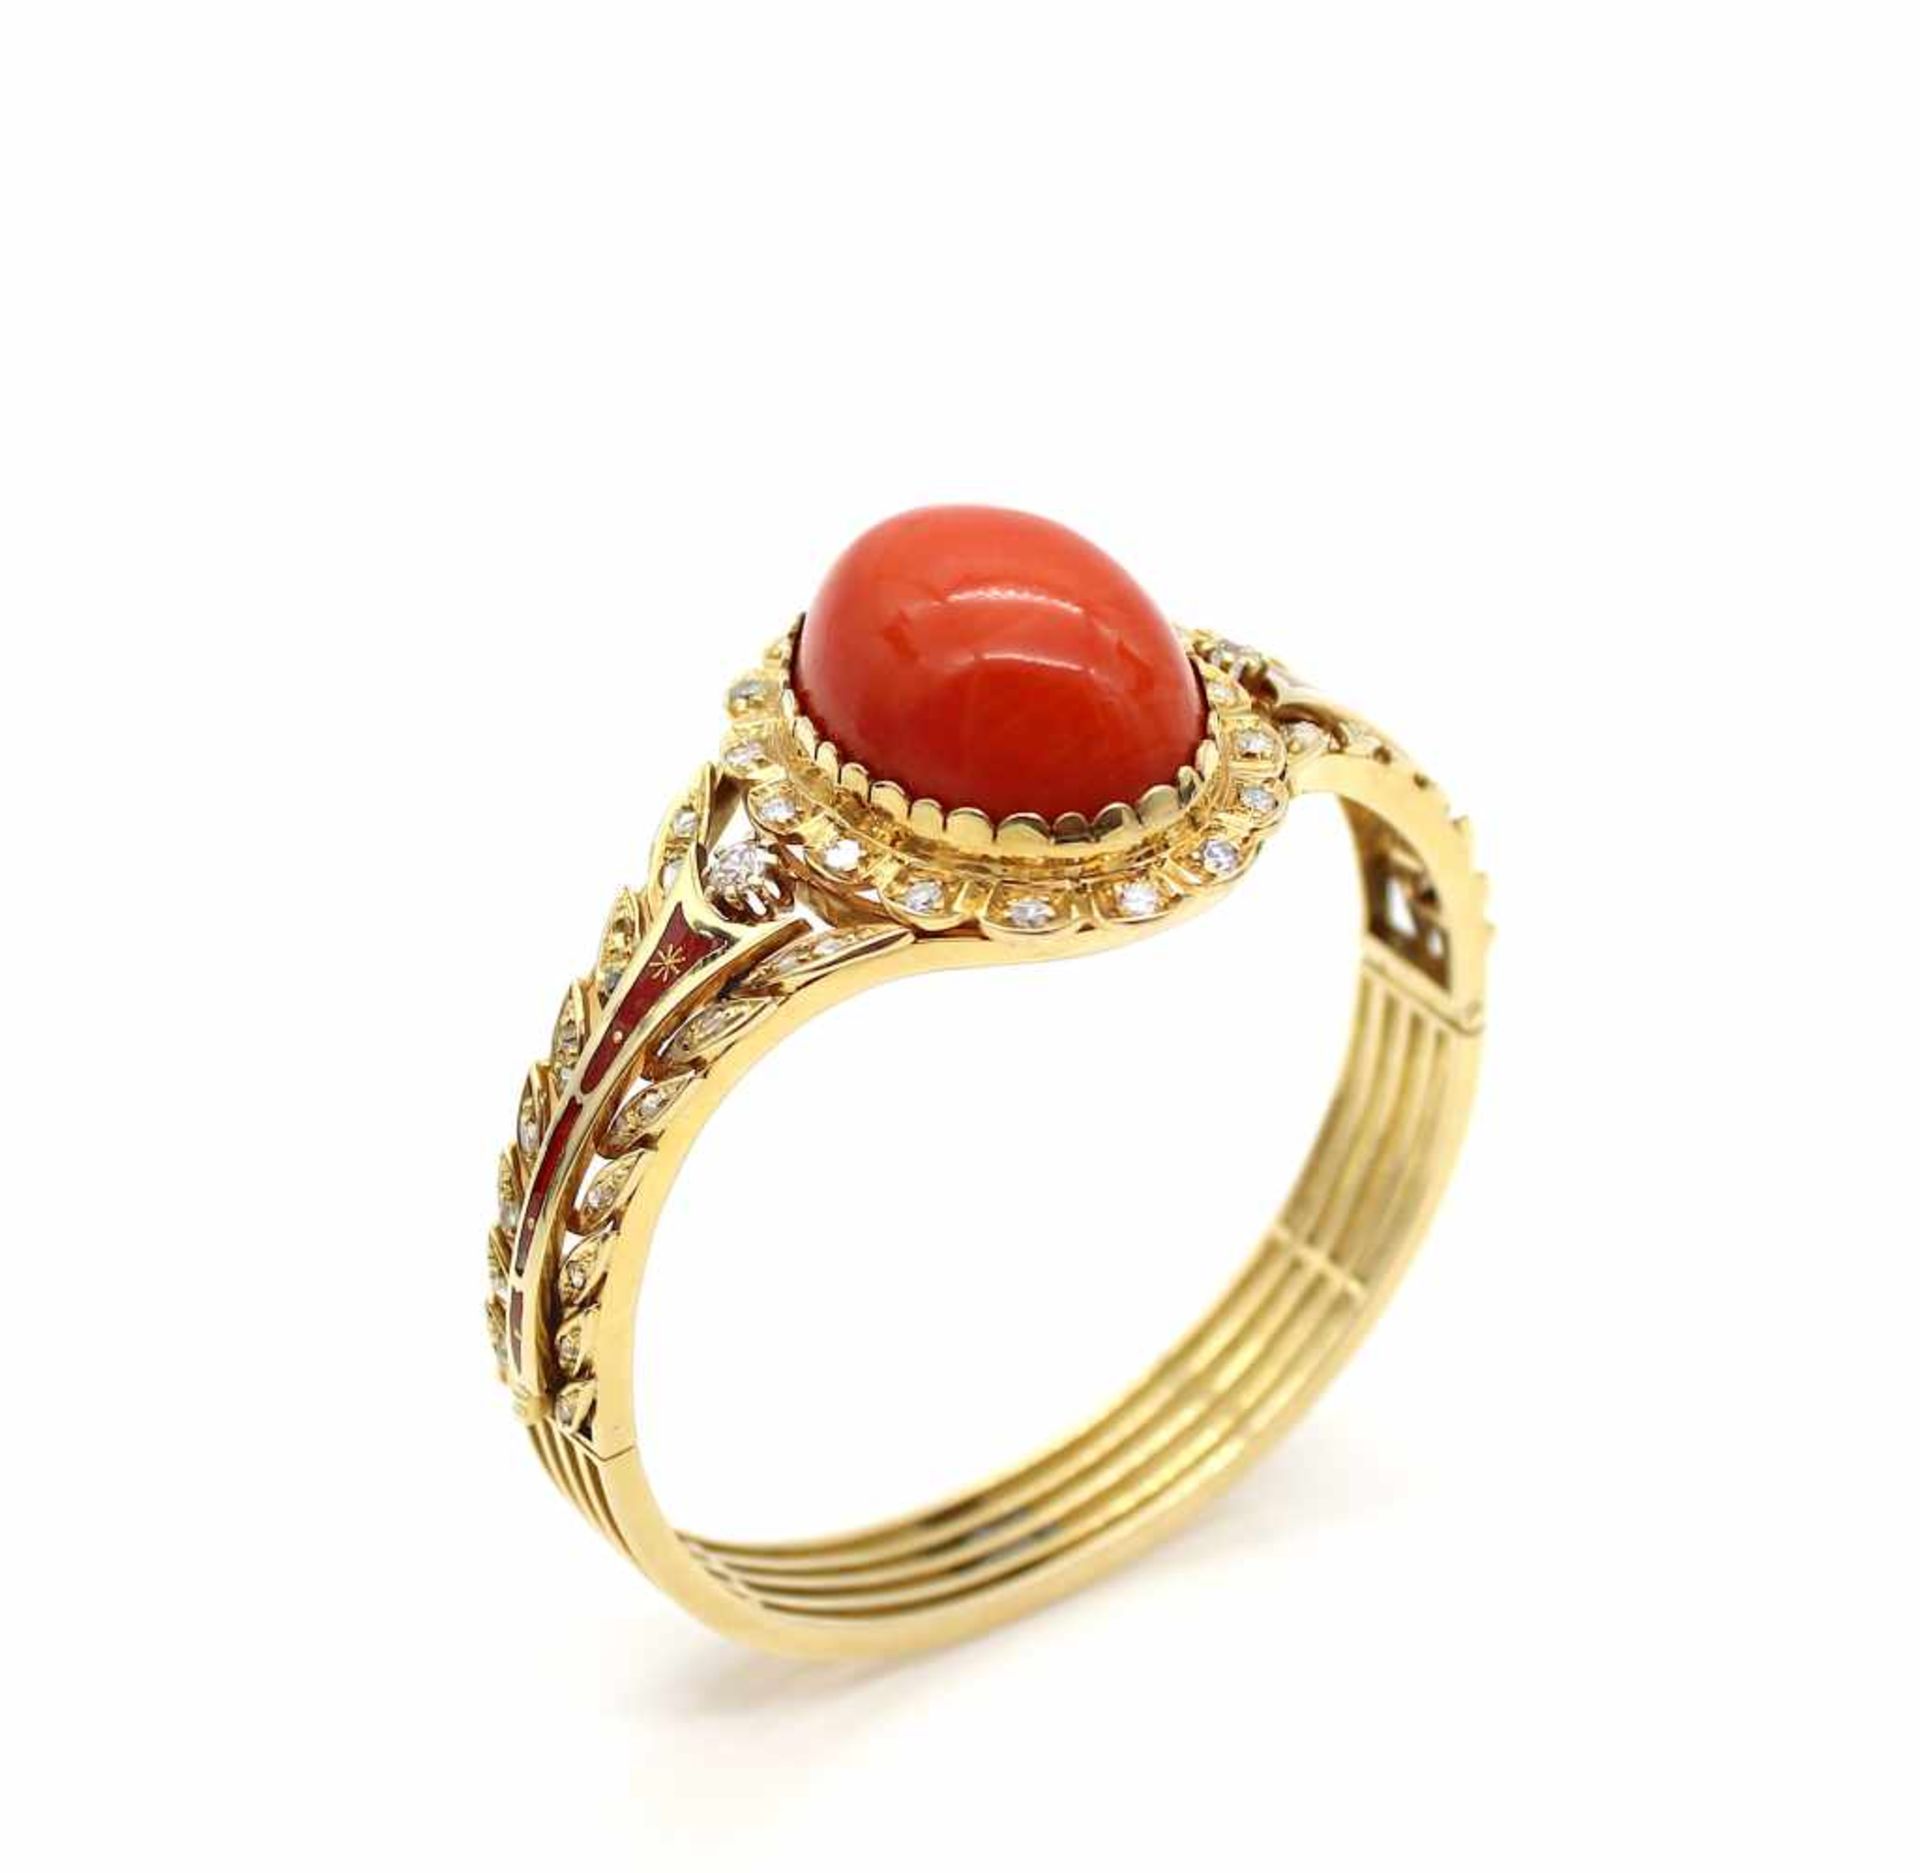 Bracelet made of 585 gold with an oval, orange-red coral approx. 47 ct, 58 diamonds partly old cut